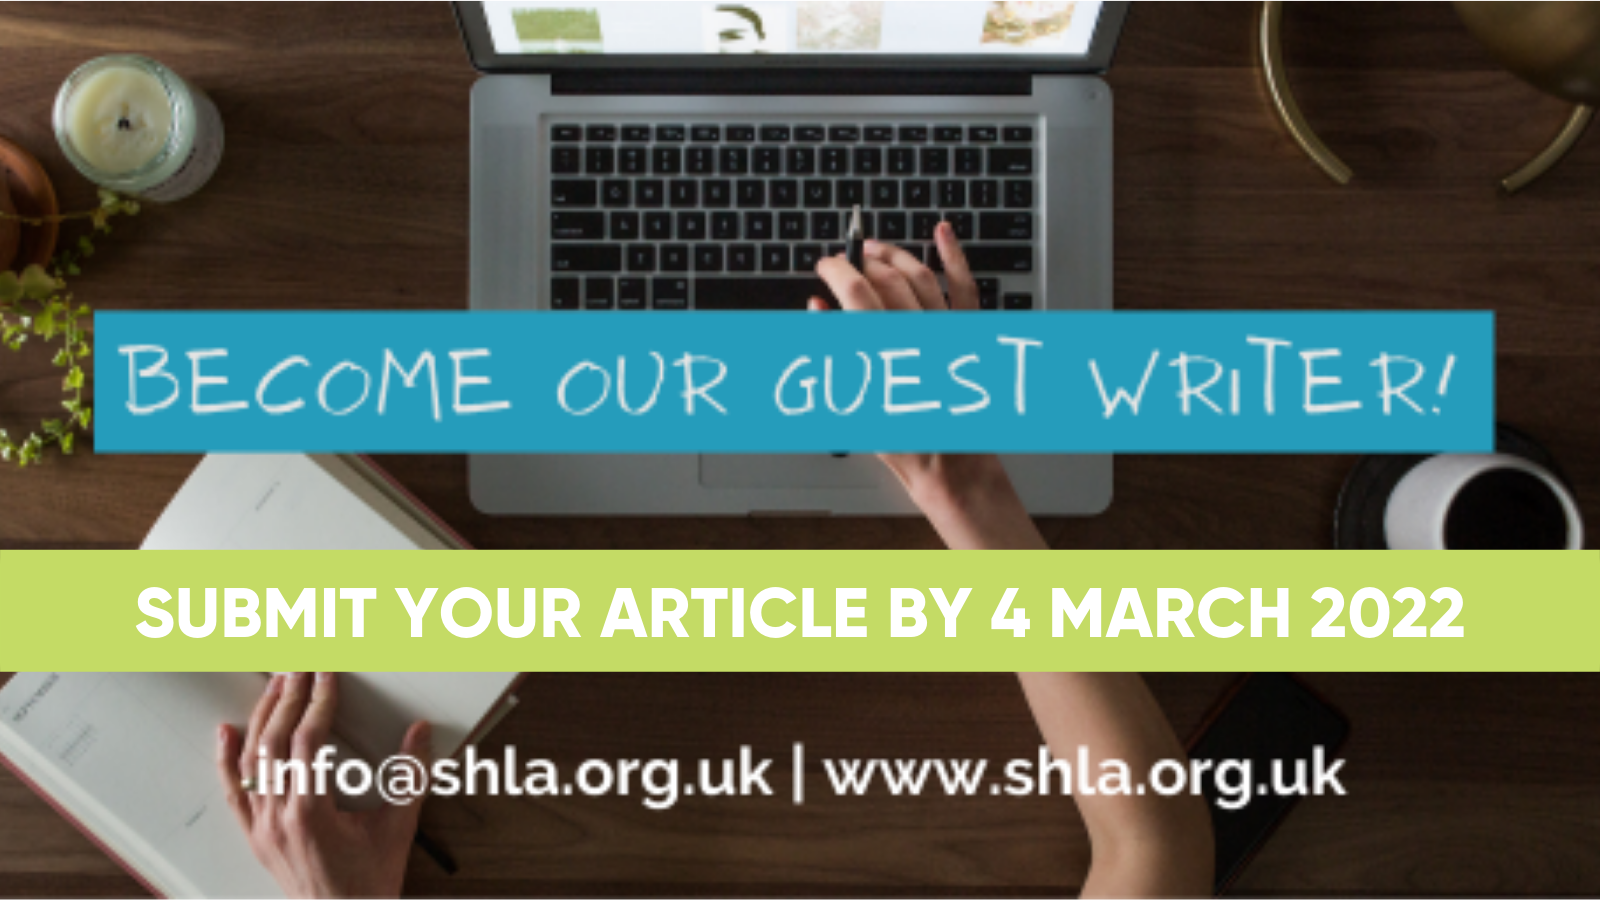 WILL YOU BE THE NEXT SHLA GUEST WRITER?